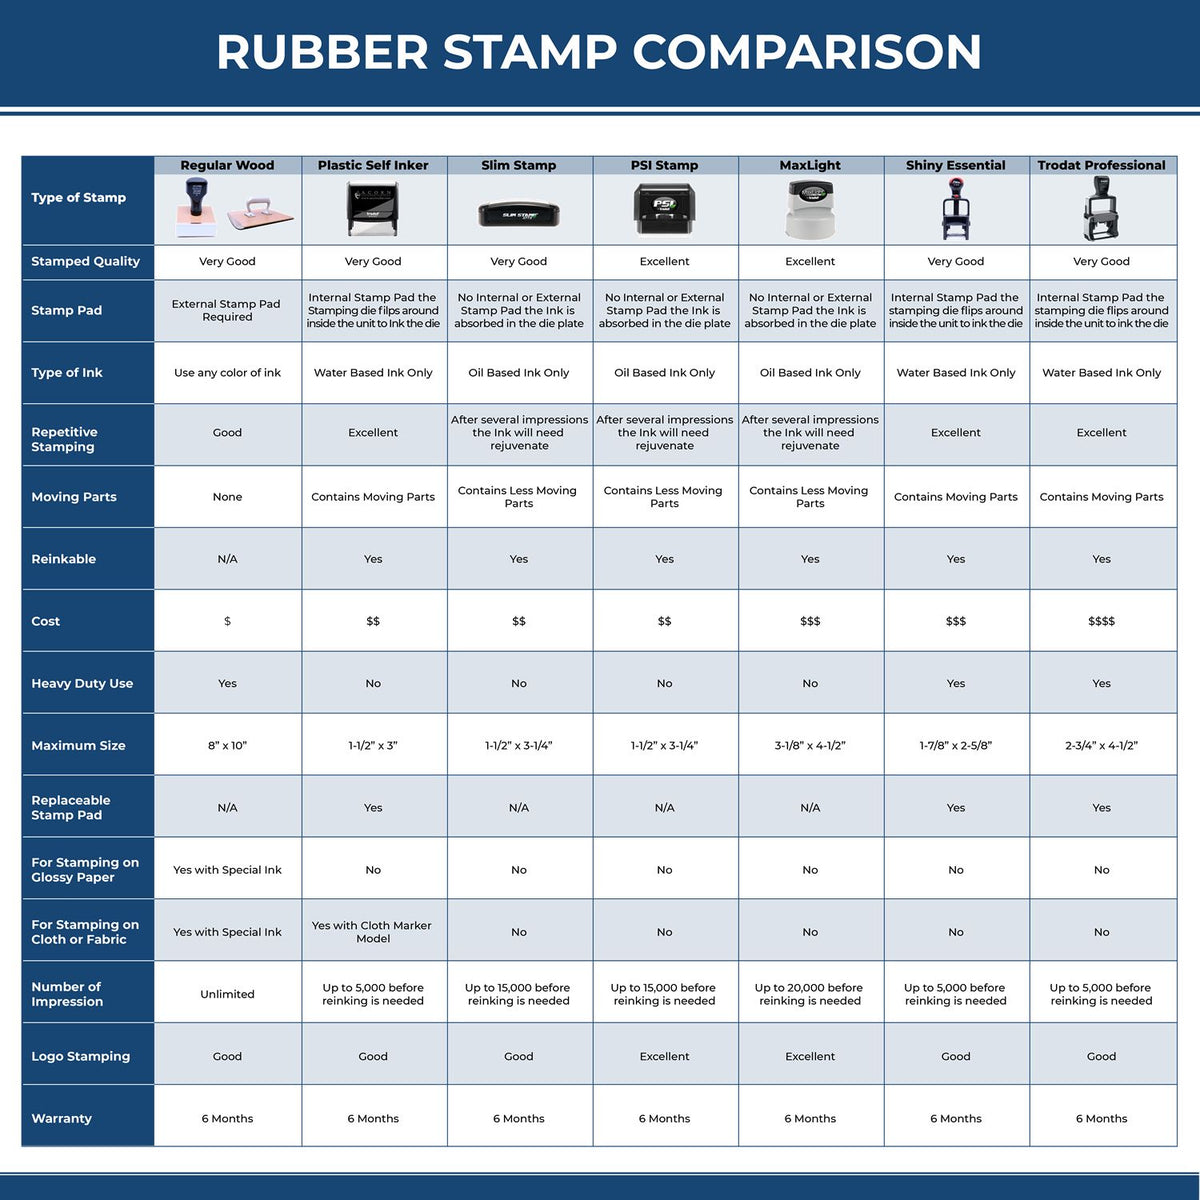 Lets review this with Lamp Rubber Stamp 4787R Rubber Stamp Comparison